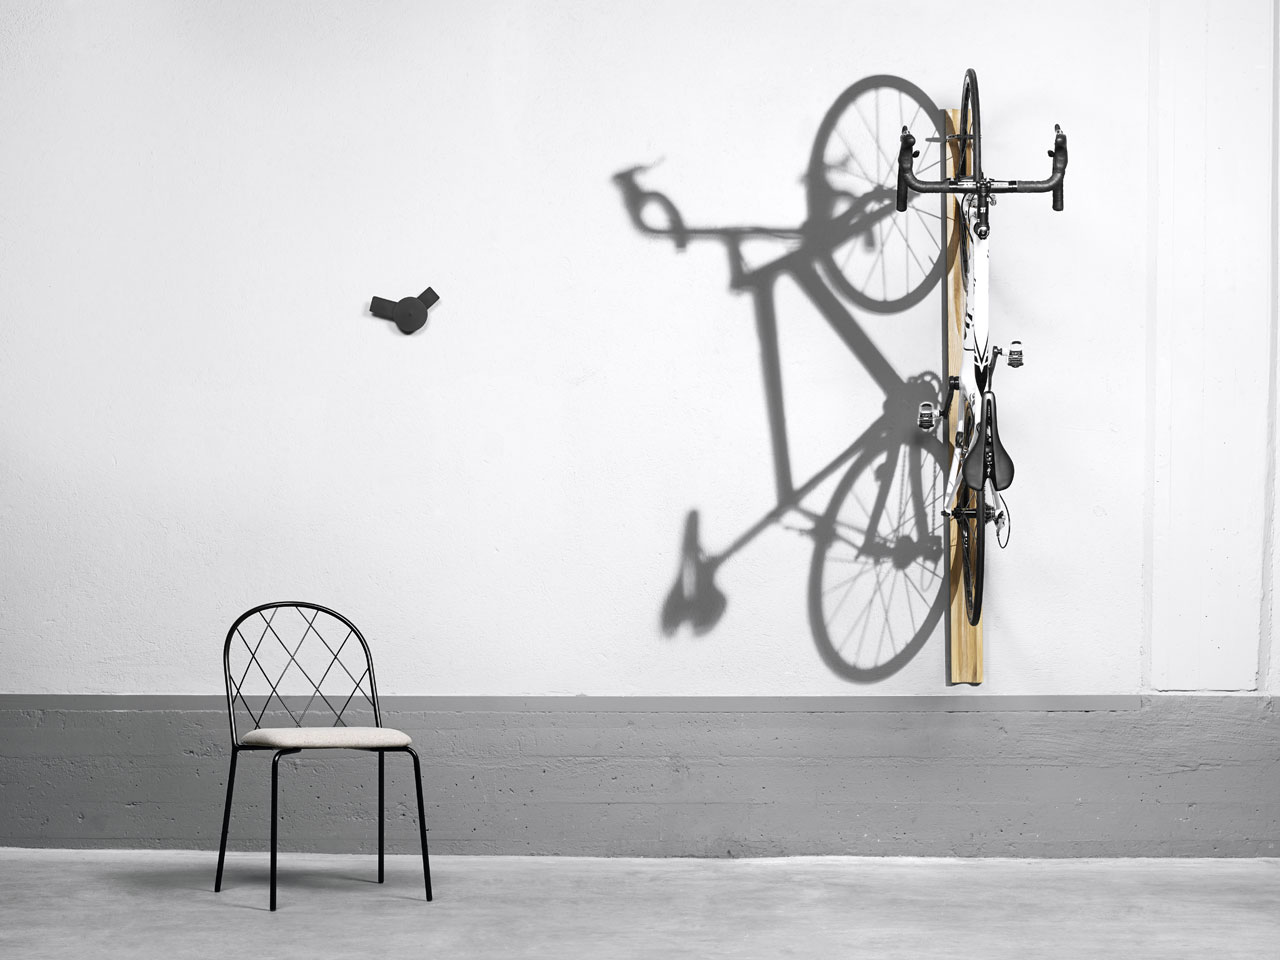 Mesh chair by Lars Hofsjö, O´clock  wall clock by Louise Hederström and Giro wall-mounted cycle rack by Mattias Stenberg for David Design.